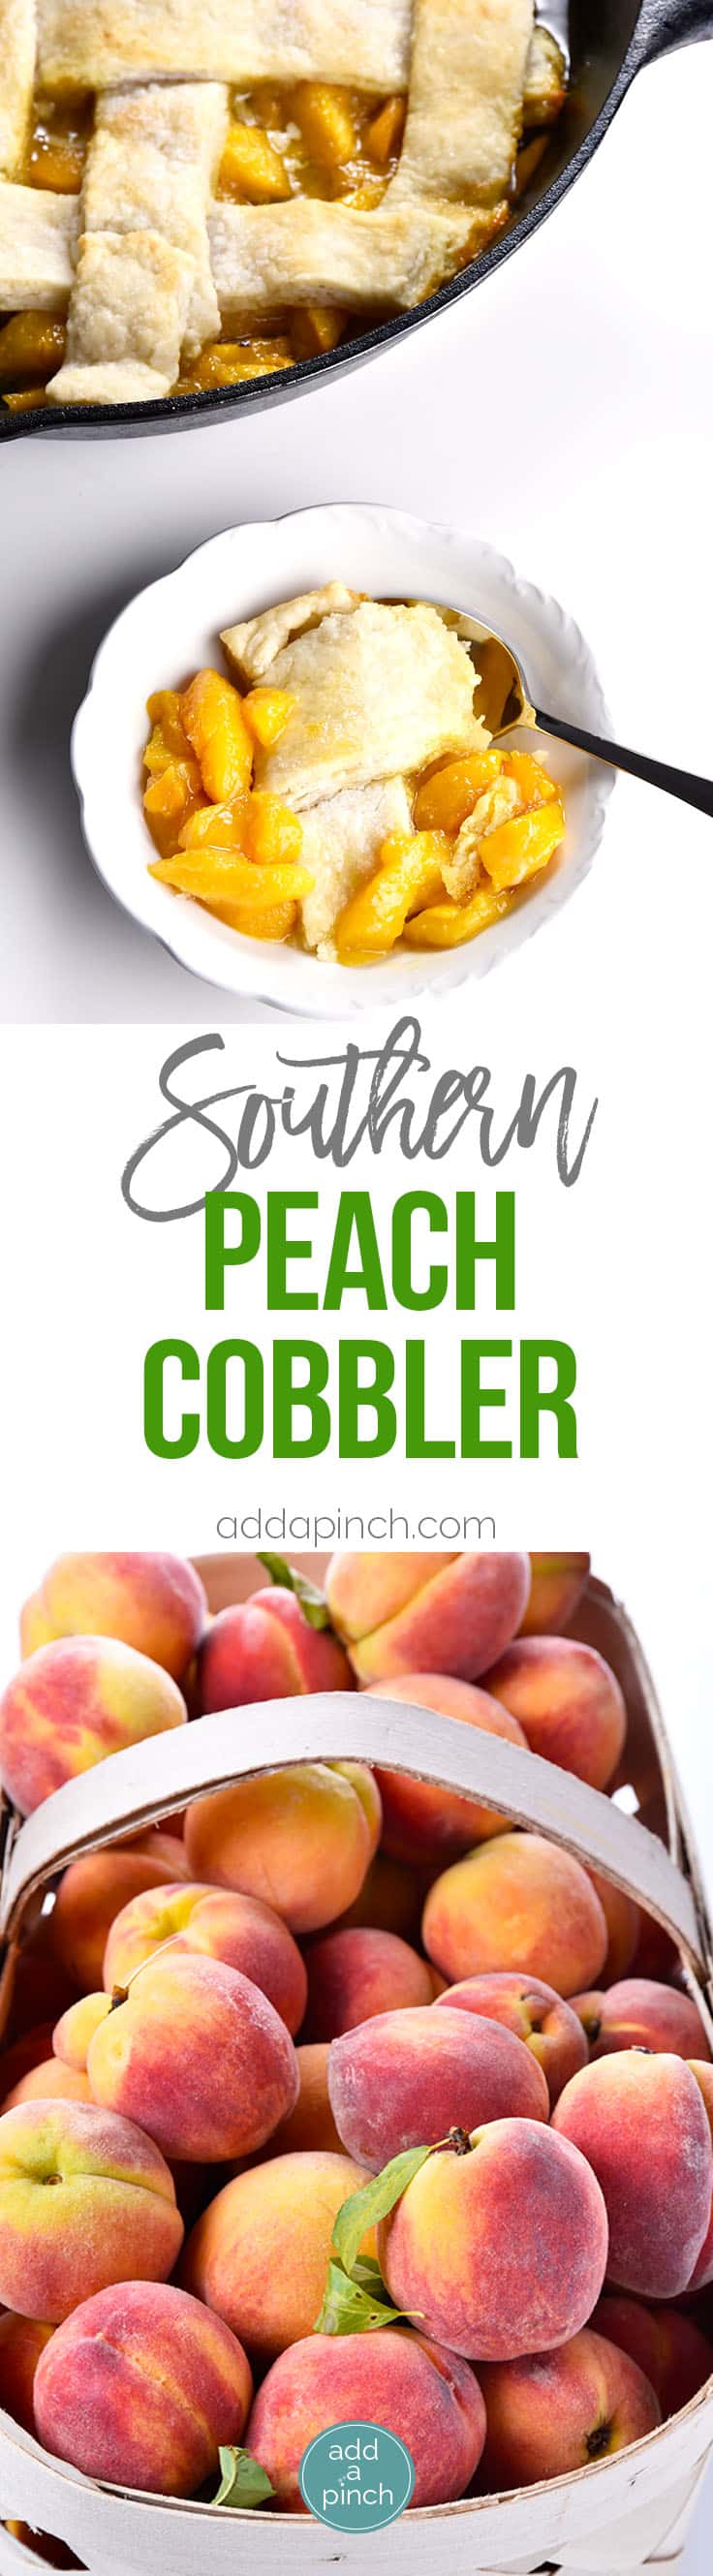 Old Fashioned Southern Peach Cobbler Recipe - Peach Cobbler Recipe – My Grandmother’s peach cobbler recipe is a traditional Southern peach cobbler! This heirloom recipe makes the best peach cobbler that has always been a staple in my family for generations. // addapinch.com